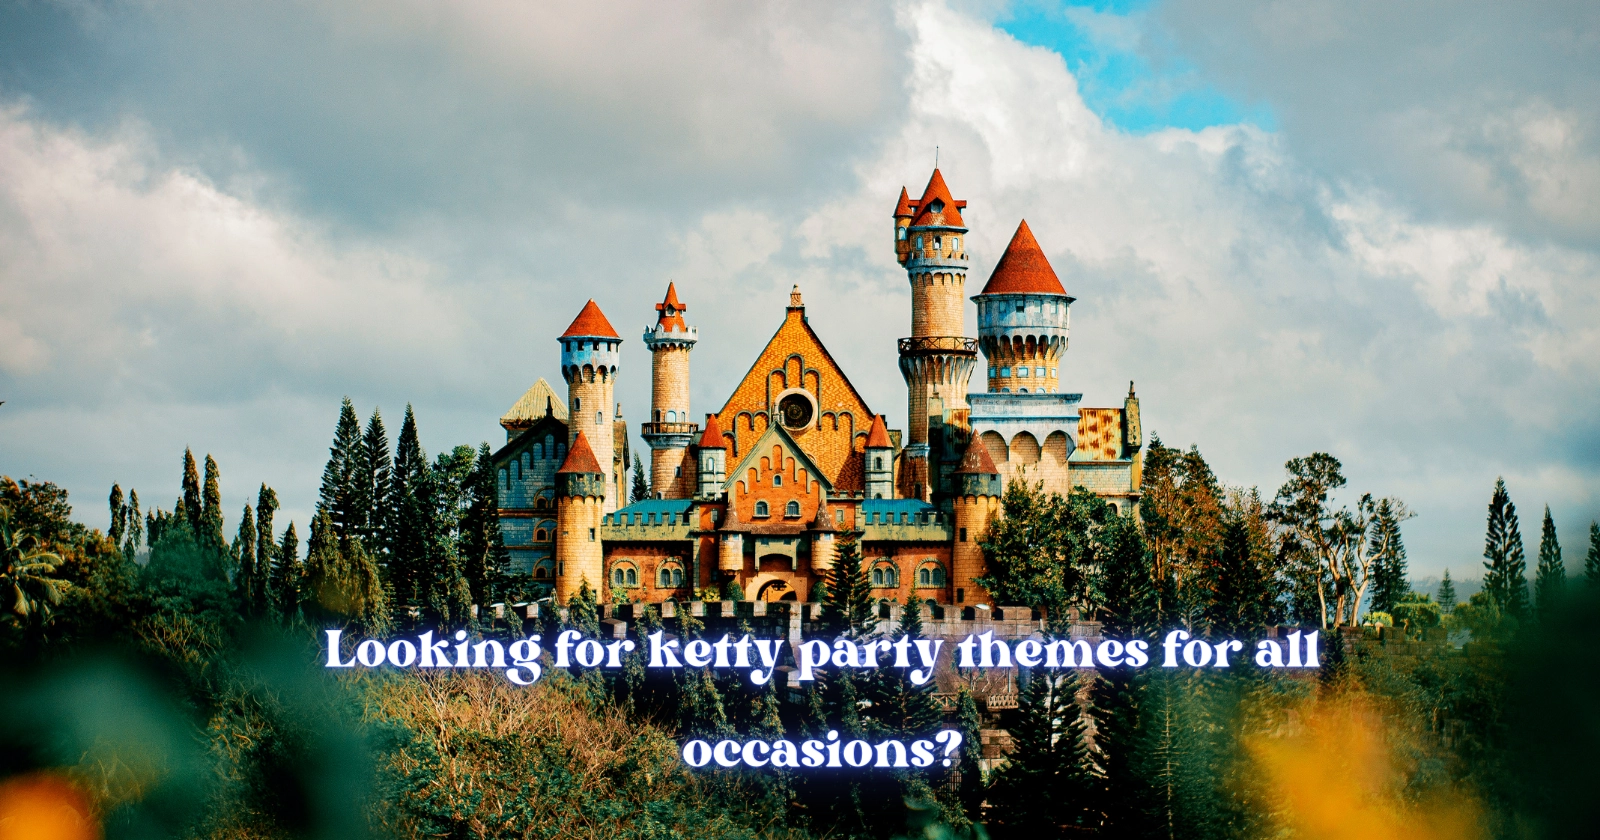 Ketty Party themes